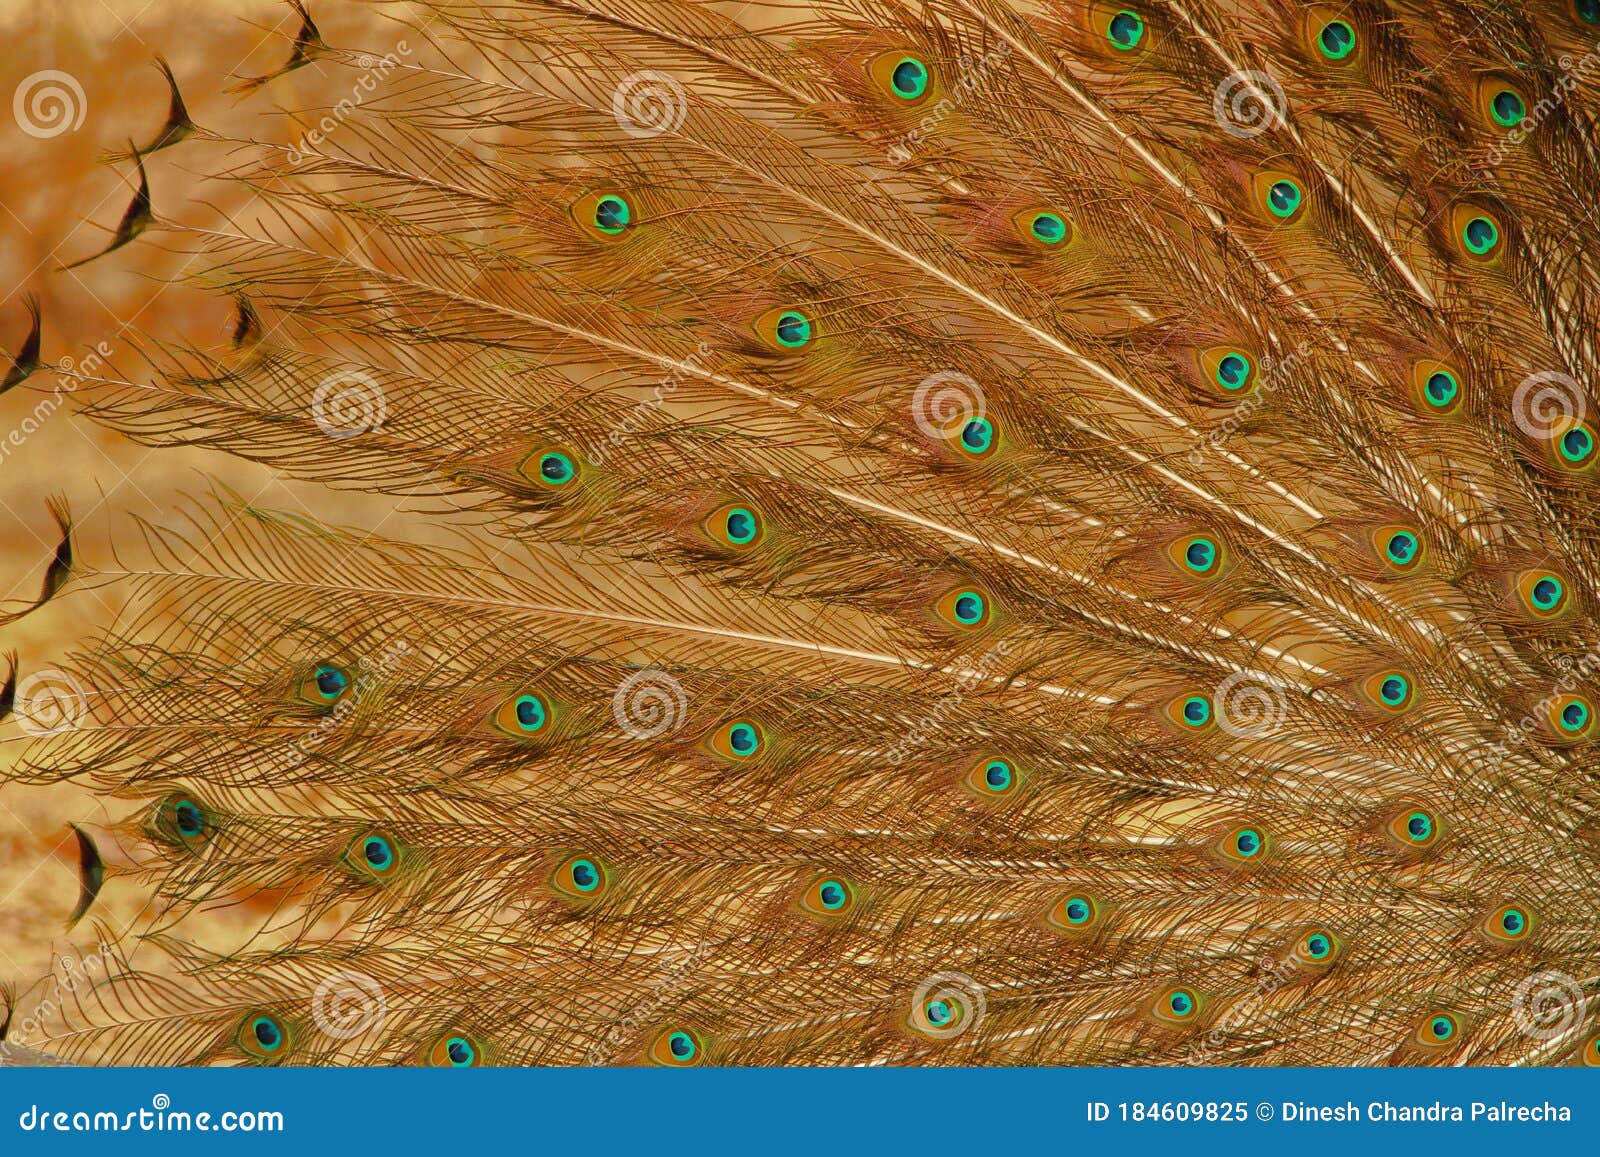 Beautiful, Artistic Colored Peacock Feather, Natural, Nature. Wallpaper  Stock Image - Image of beautiful, peacock: 184609825